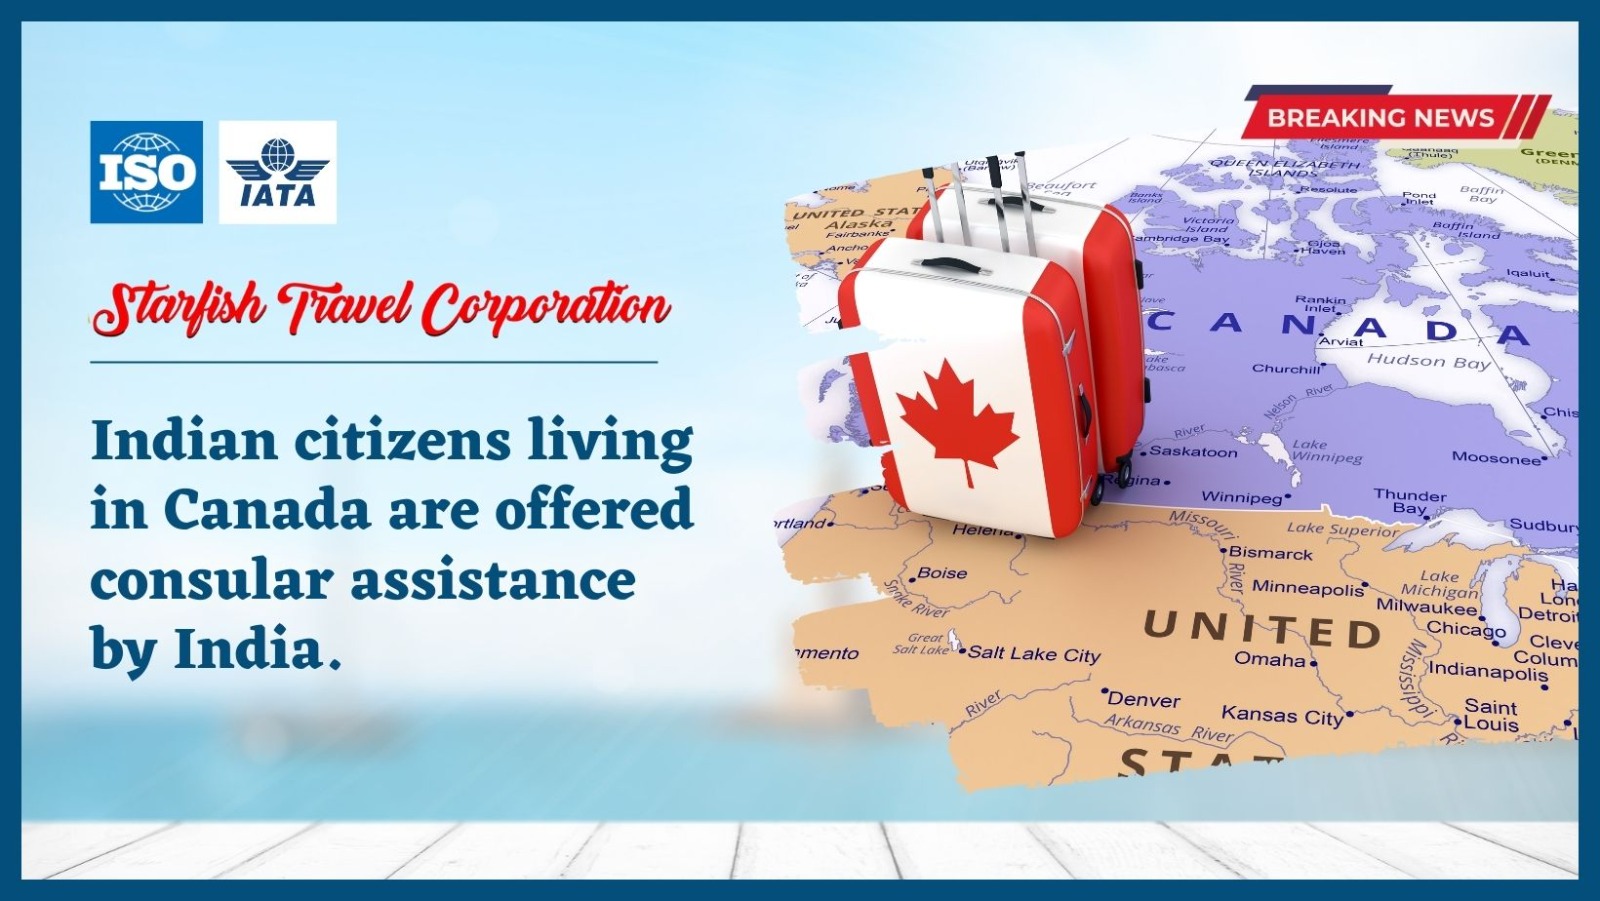 Indian citizens living in Canada are offered consular assistance by India.